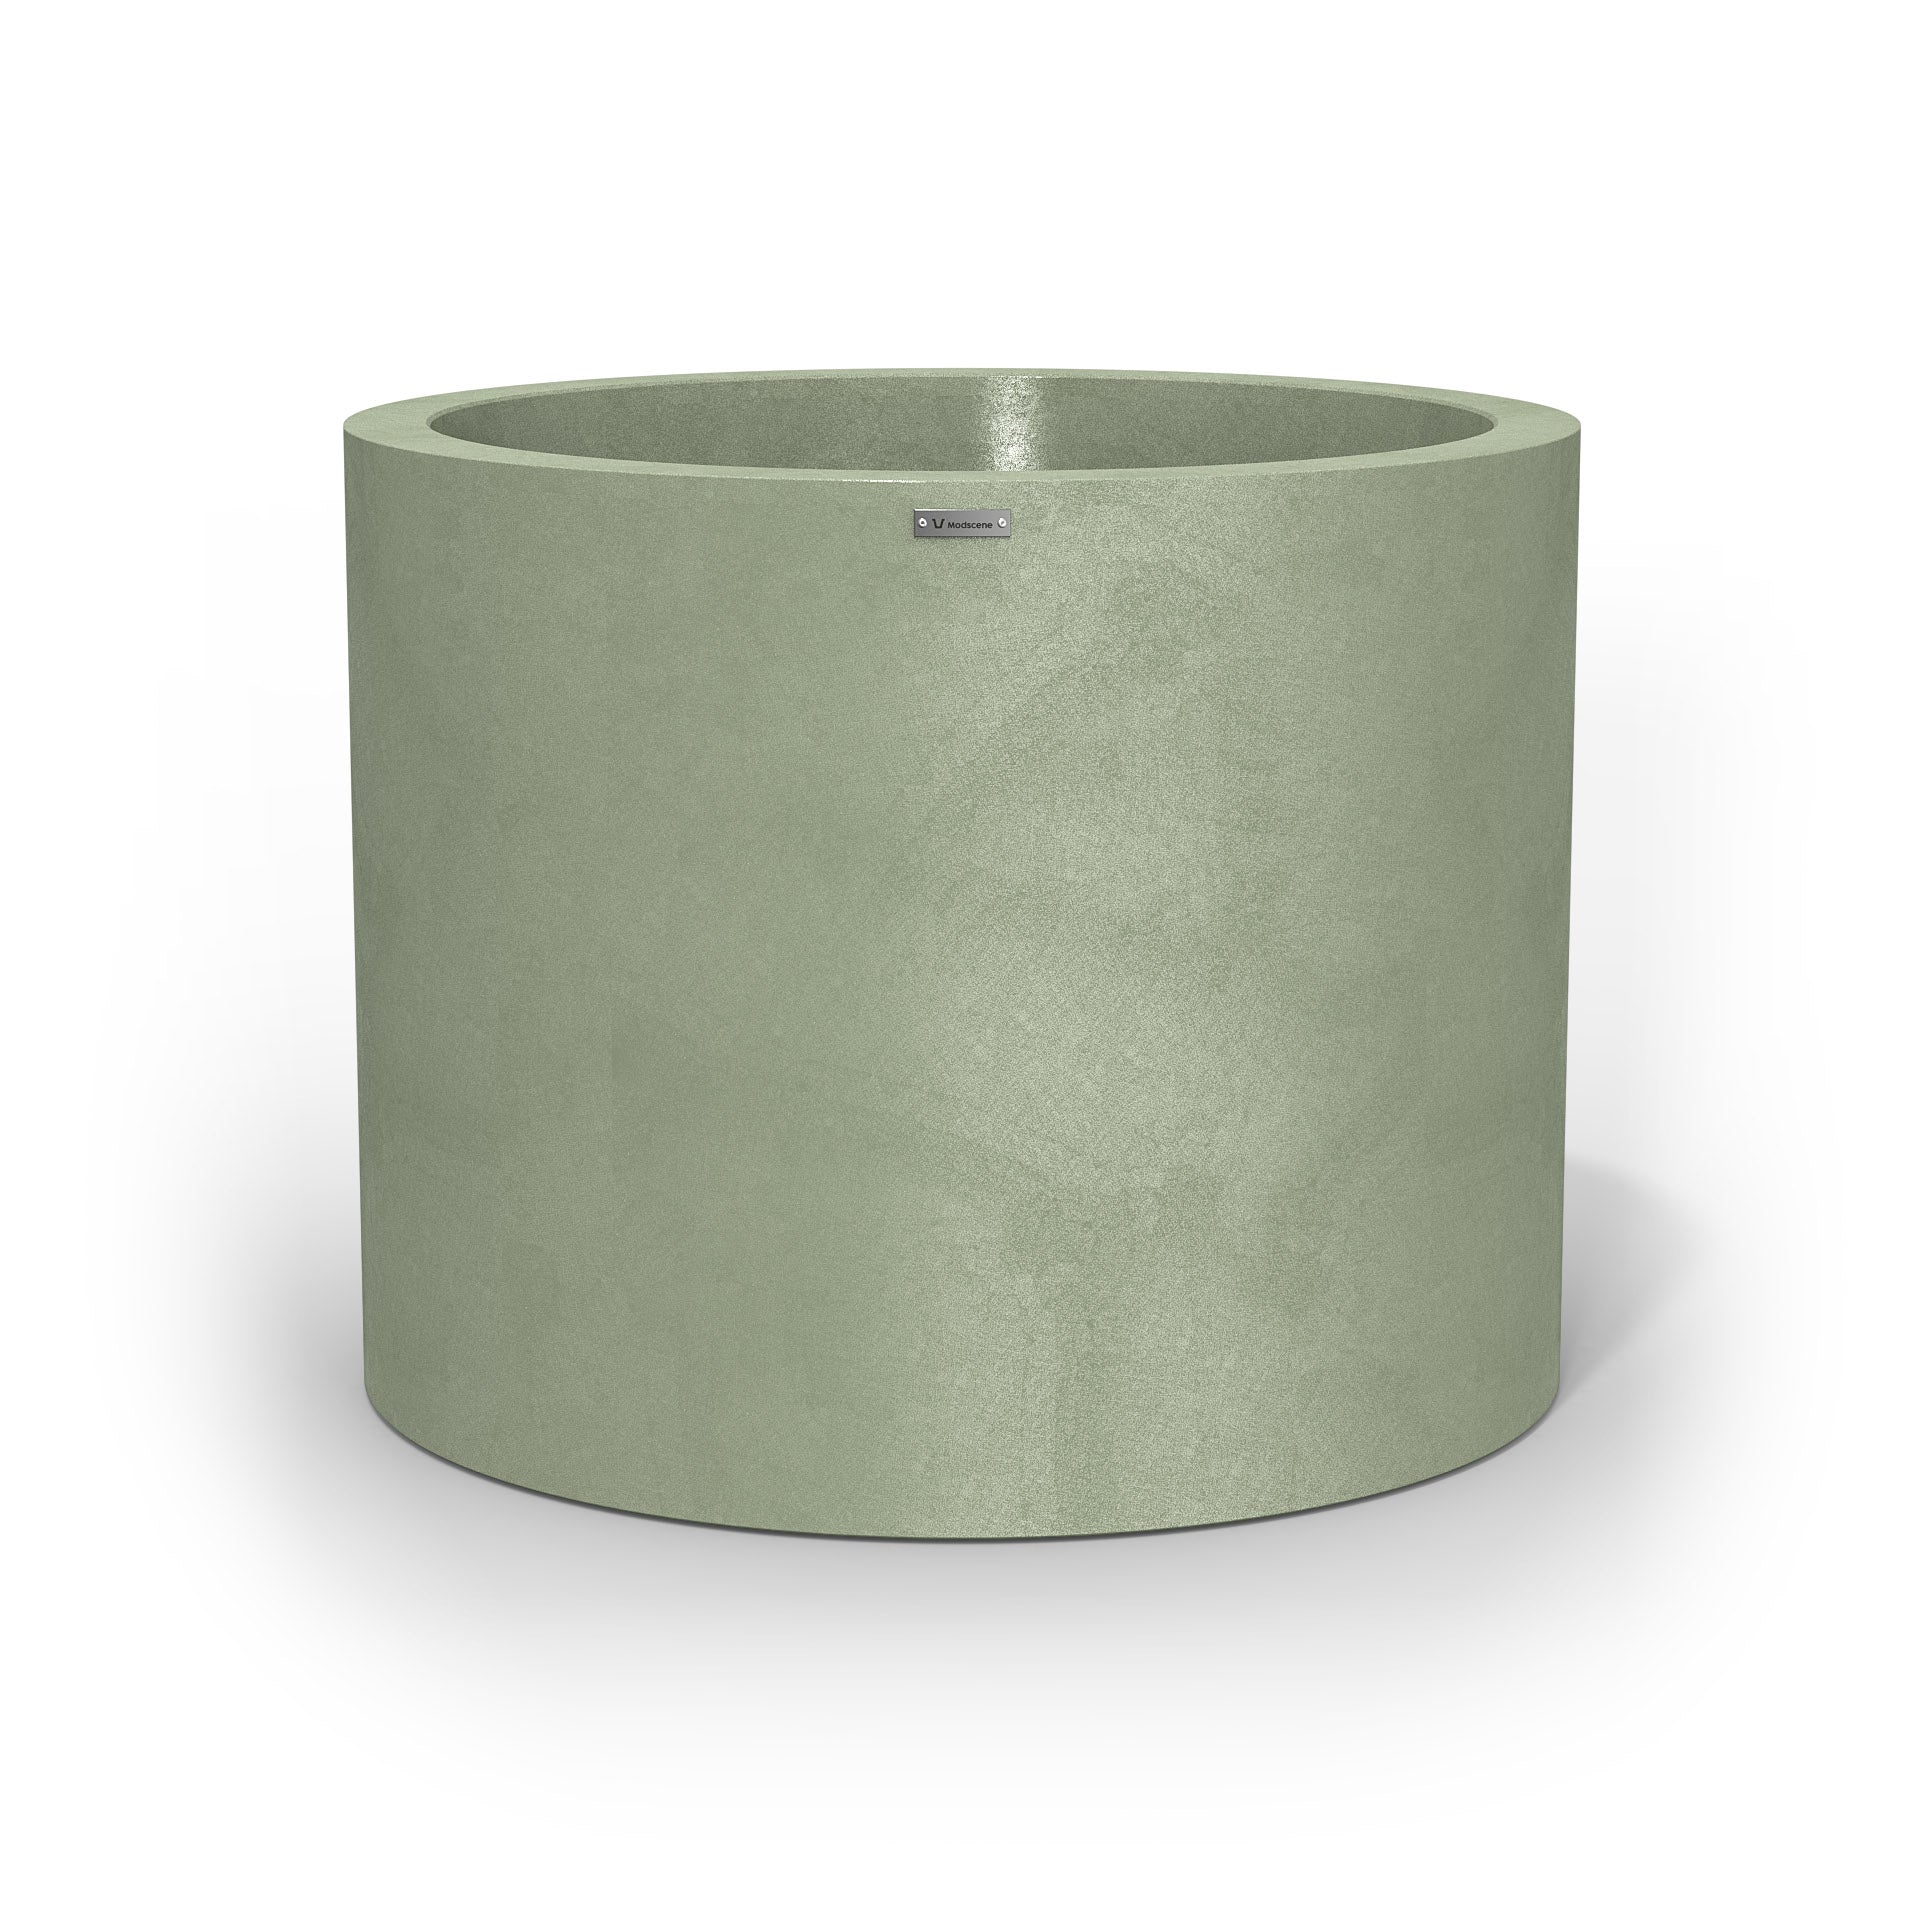 A giant cylinder pot planter in a pastel green colour with a concrete look finish.